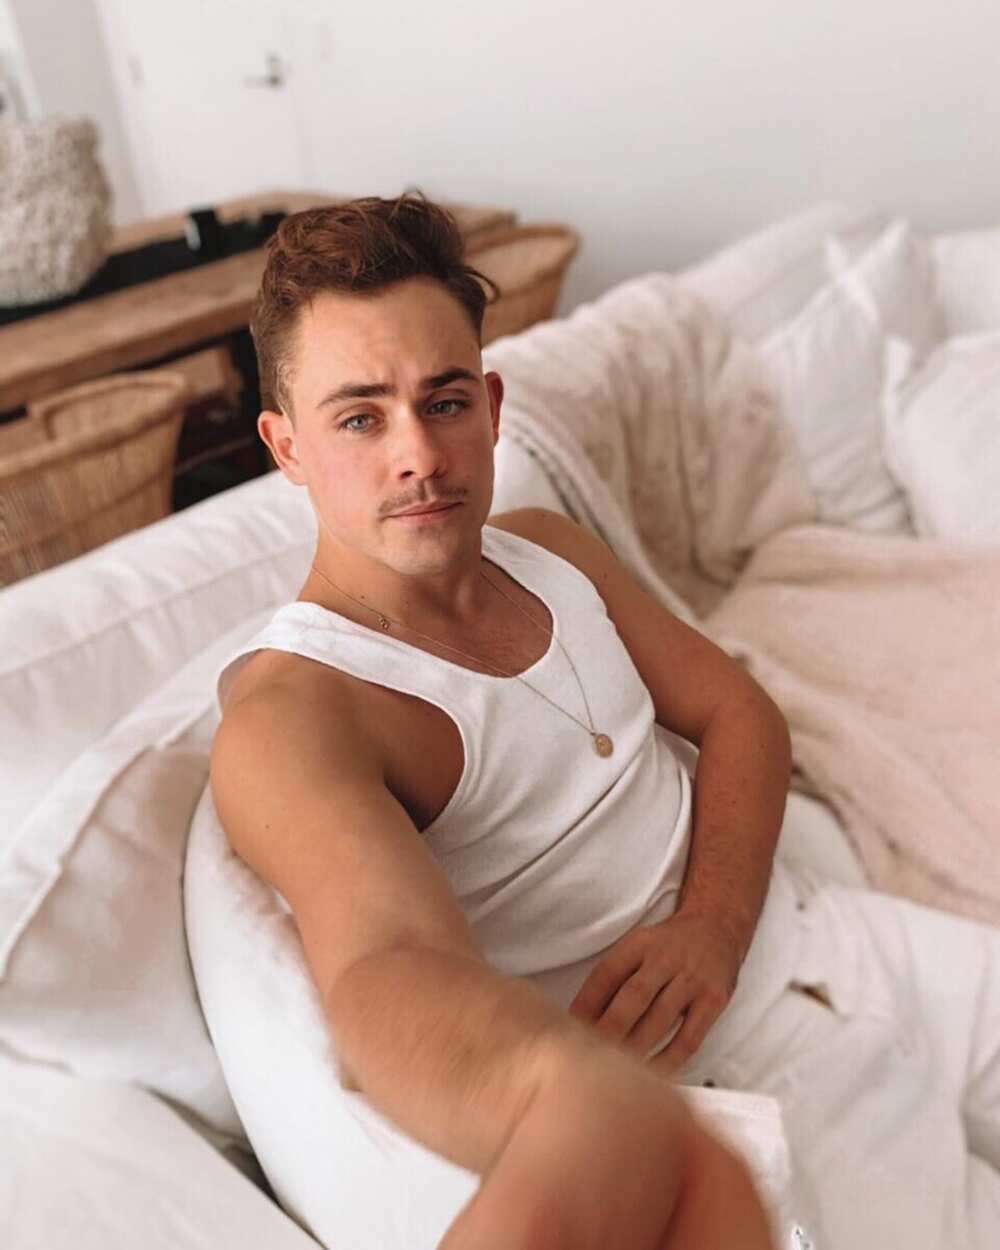 Dacre Montgomery bio: age, height, net worth, who is he dating?